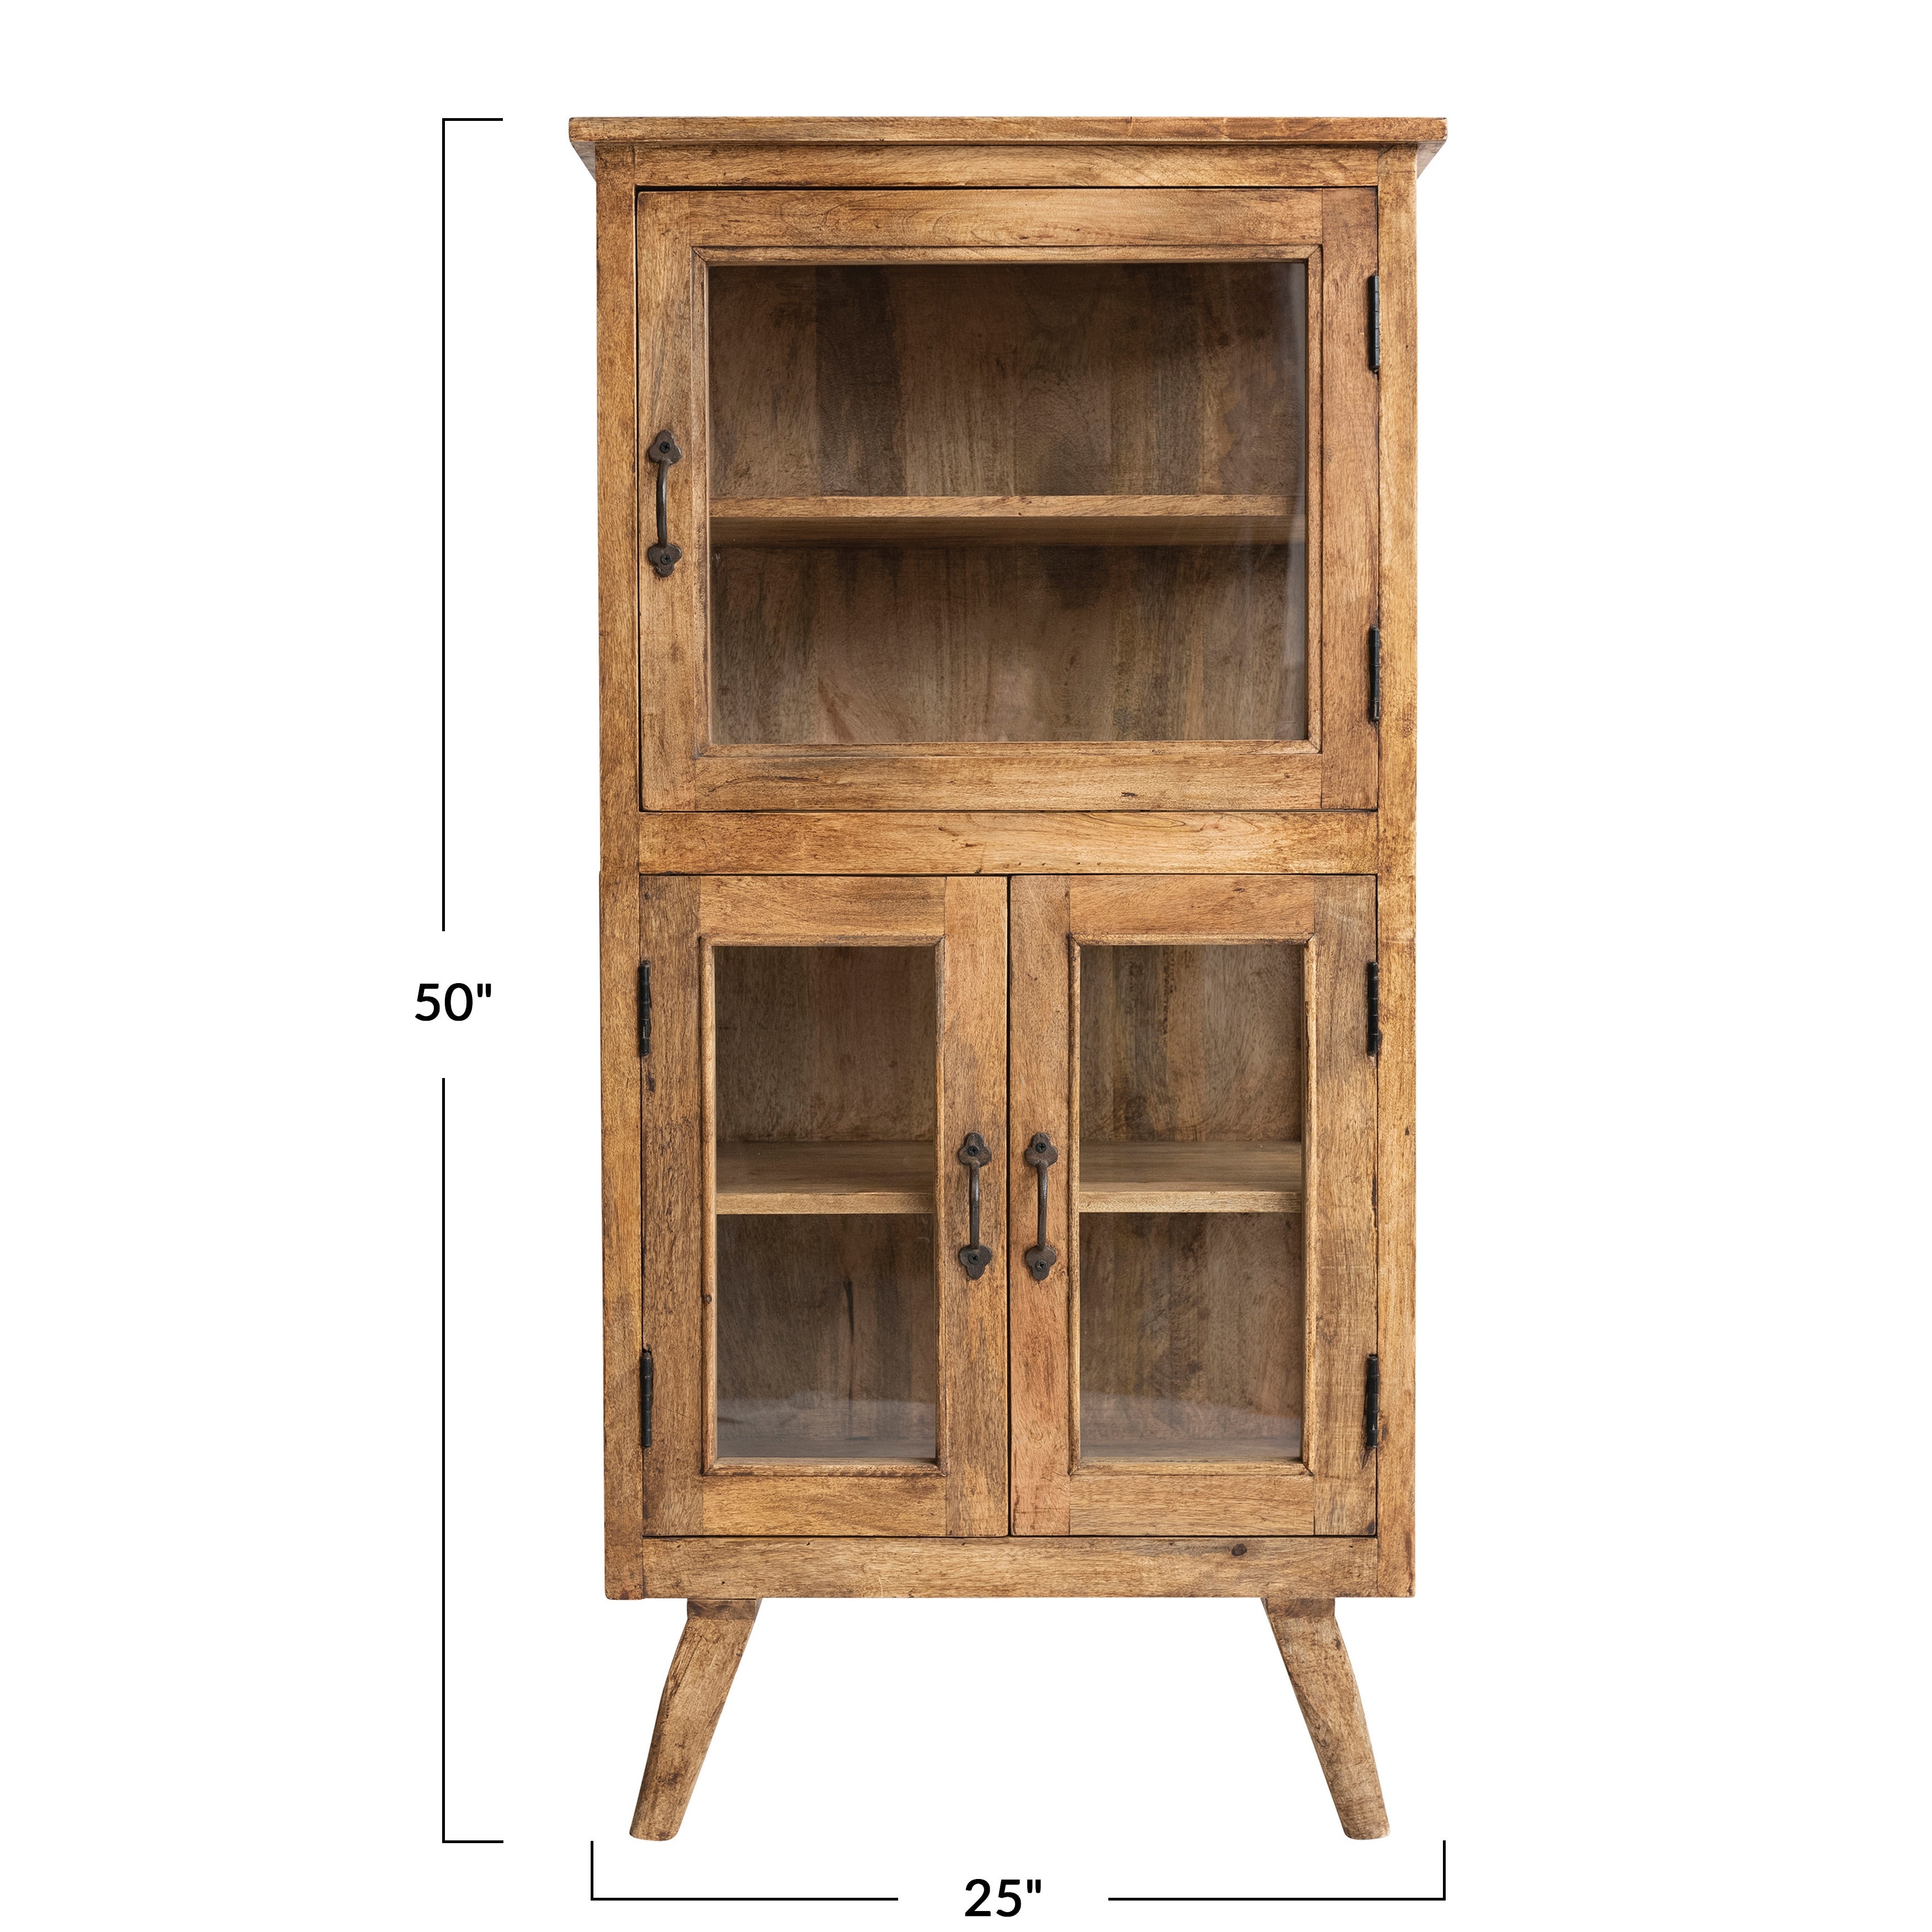 Reclaimed Wood Cabinet with 3 Glass Doors - 25.0"L x 16.0"W x 50.0"H